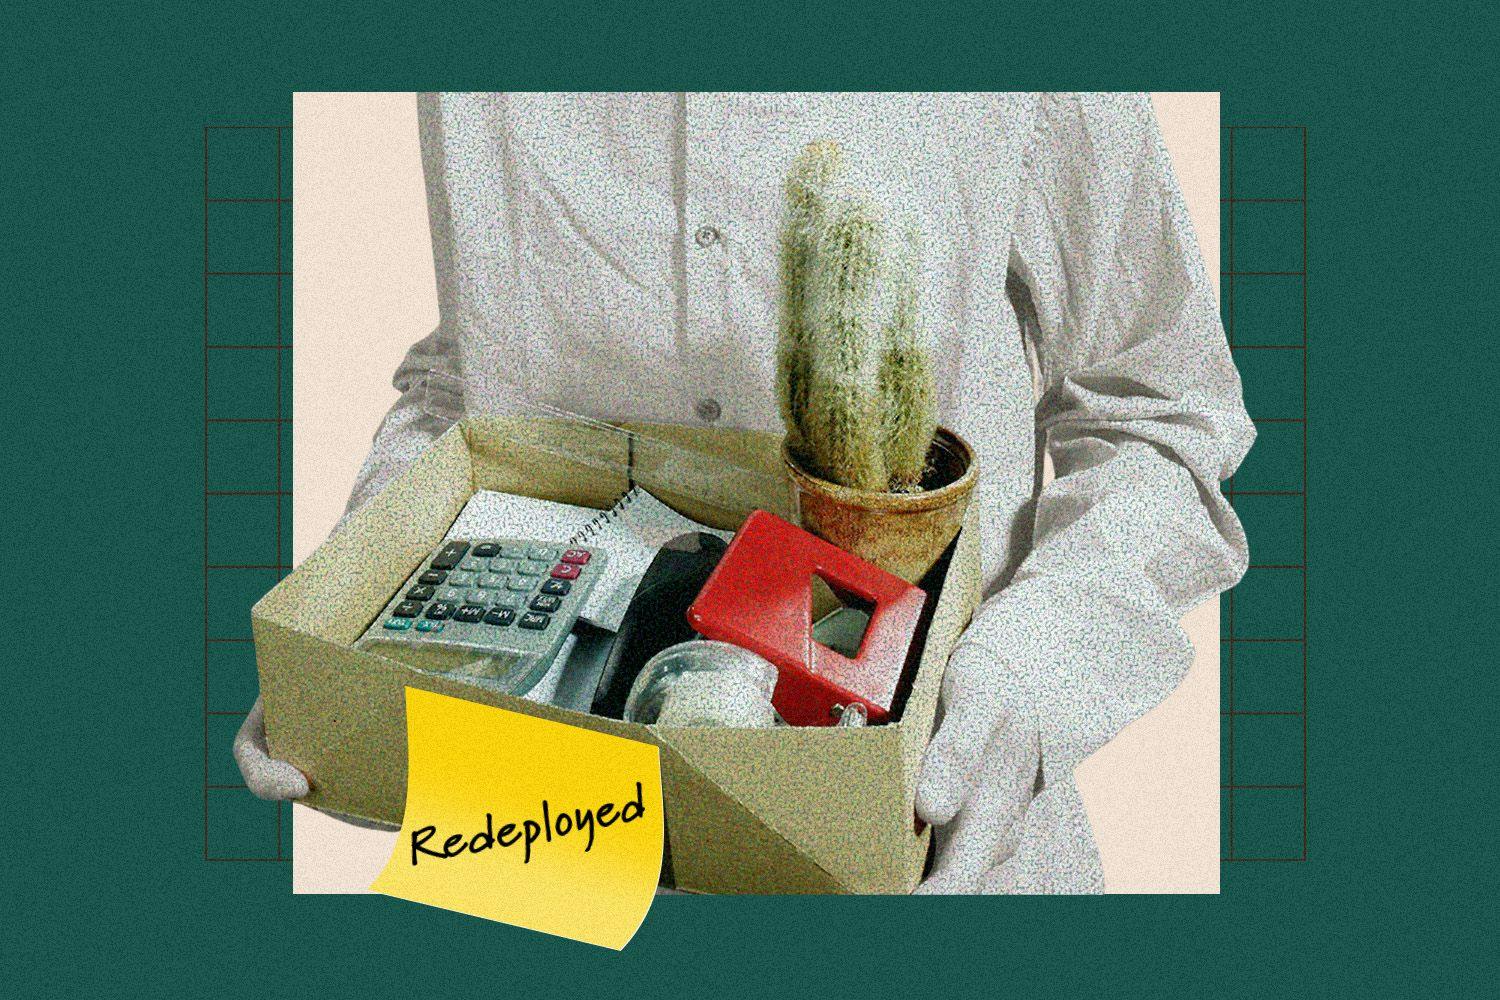 Person holding a box of desk supplies labeled "redeployment"